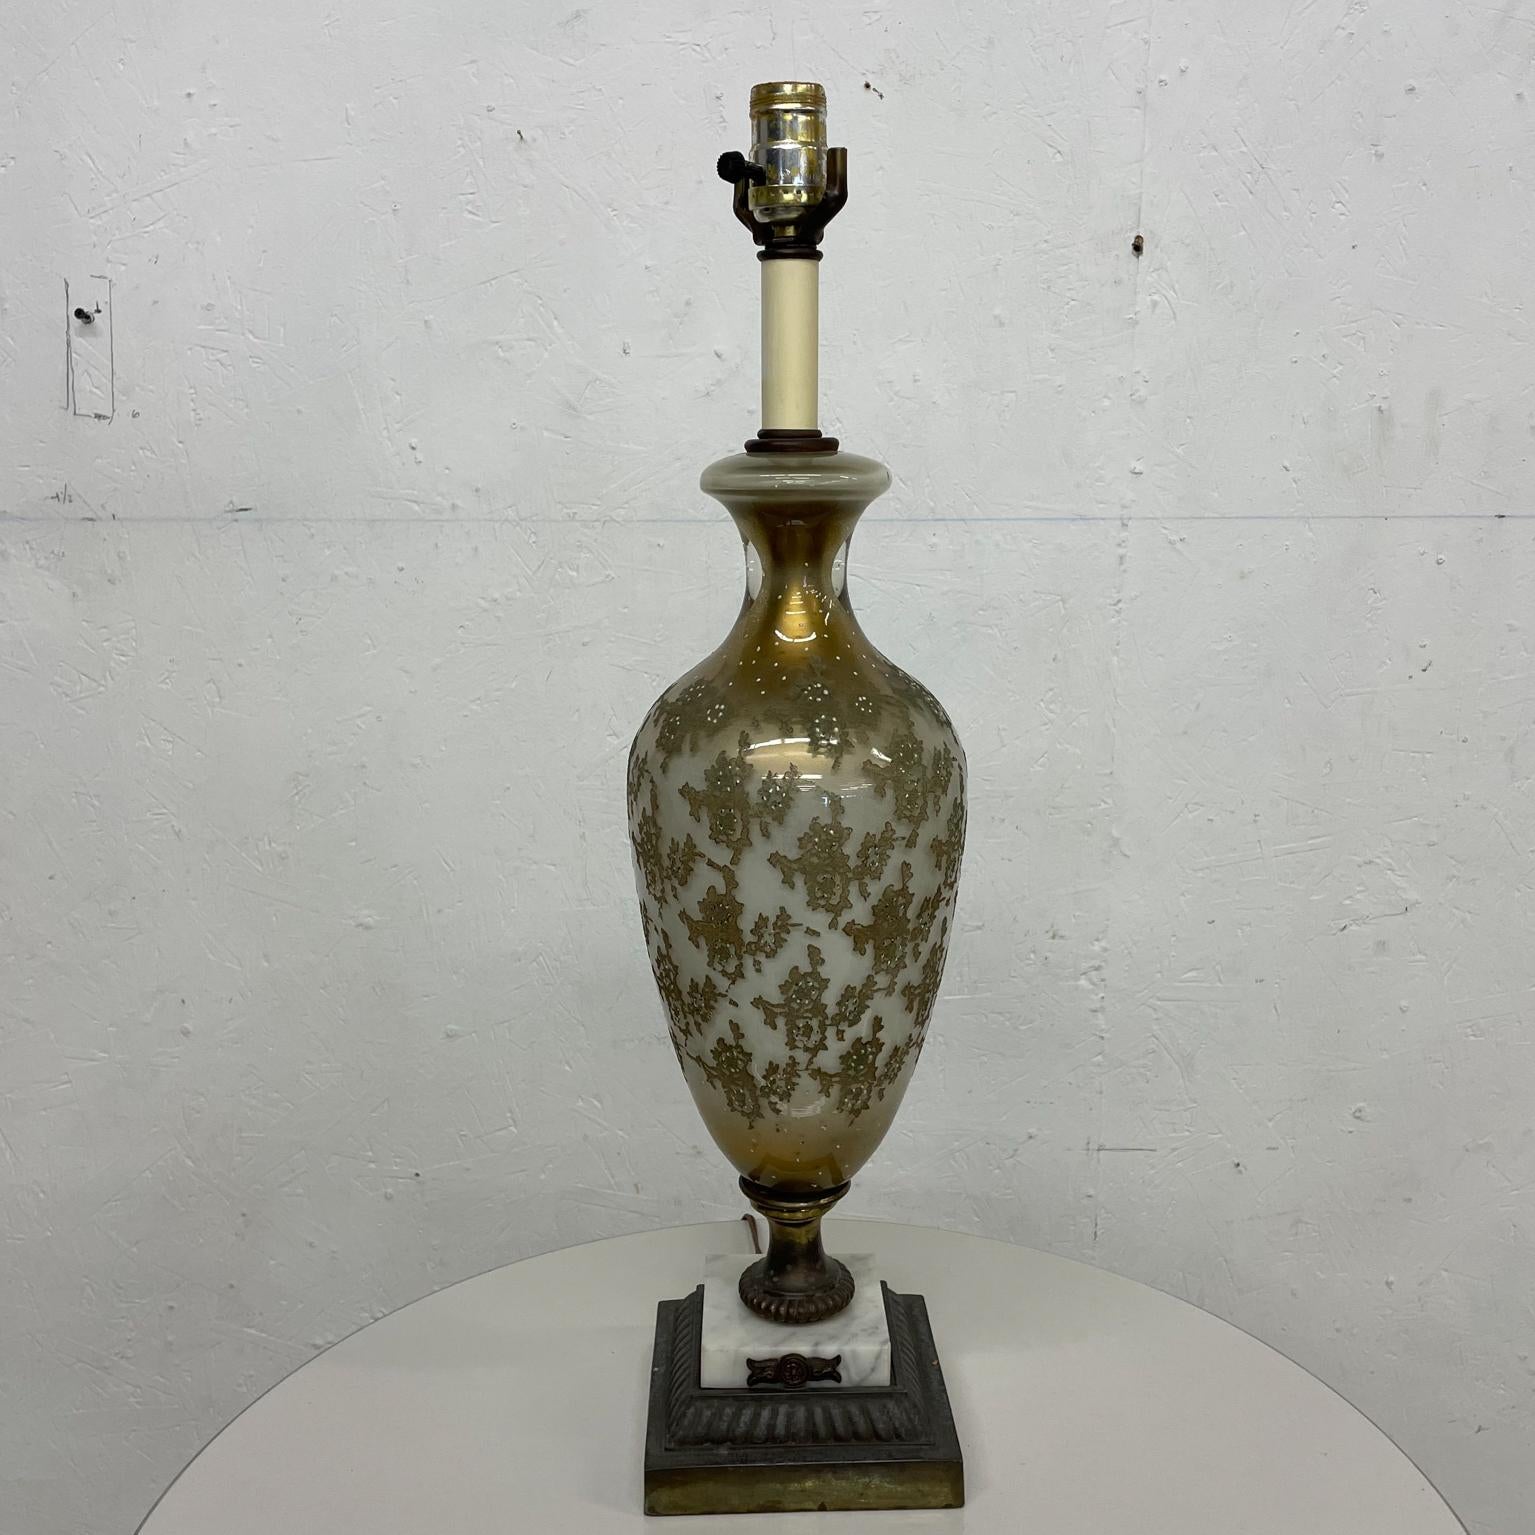 Lamp
Exquisite art glass single table Lamp attributed to Murano vintage Italy 1950s
Refined Style of Murano brass gold marble art glass 
Unmarked
Measures: 24.5 to base of socket x 6 diameter at widest point
Preowned original vintage unrestored